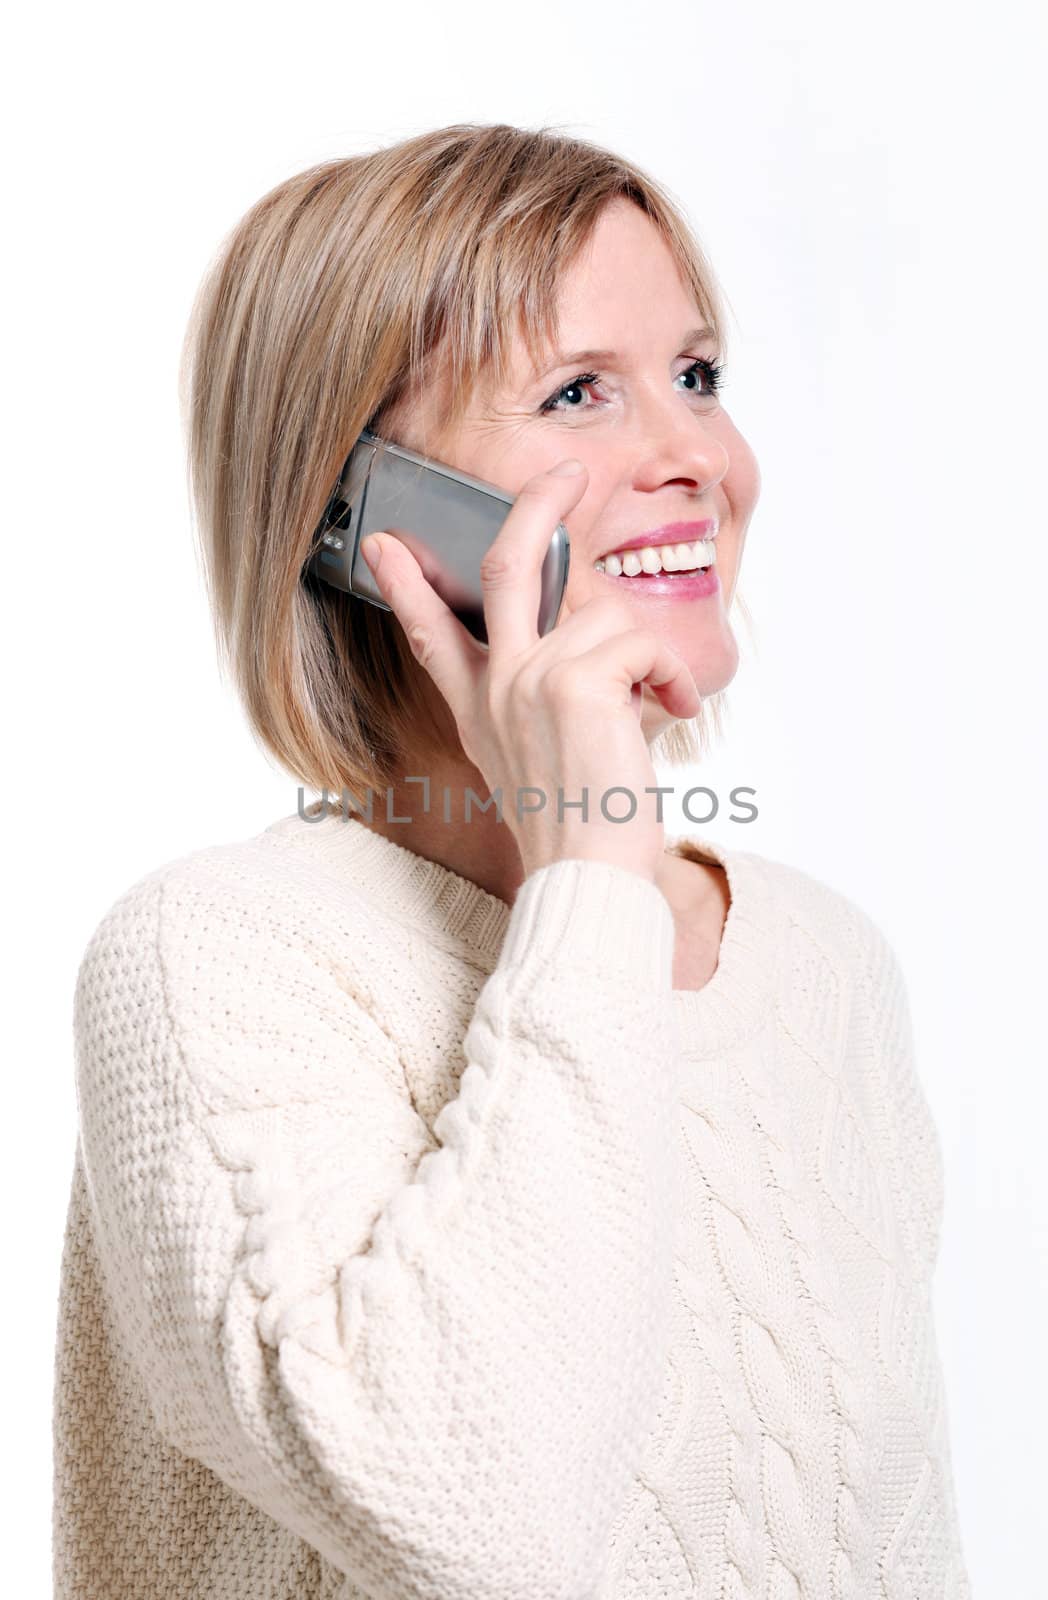 Caucasian middle aged woman on cellphone smiling by rufatjumali